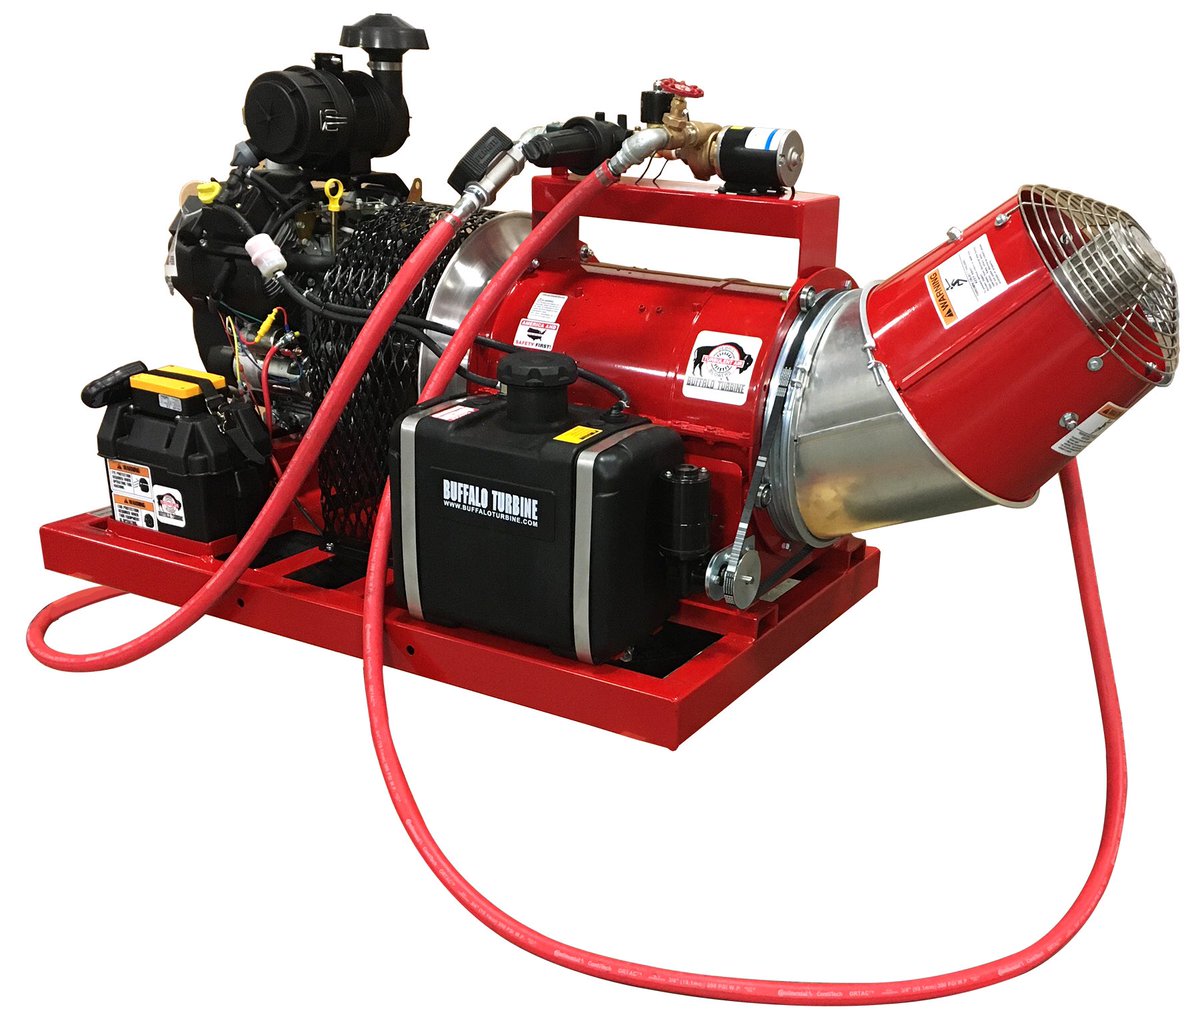 Drag racing vs. #COVID19, @BuffaloTurbine, the Official Track Blower of @NHRA offers its turbine technology to disinfect large areas. nhra.com/news/2020/drag…